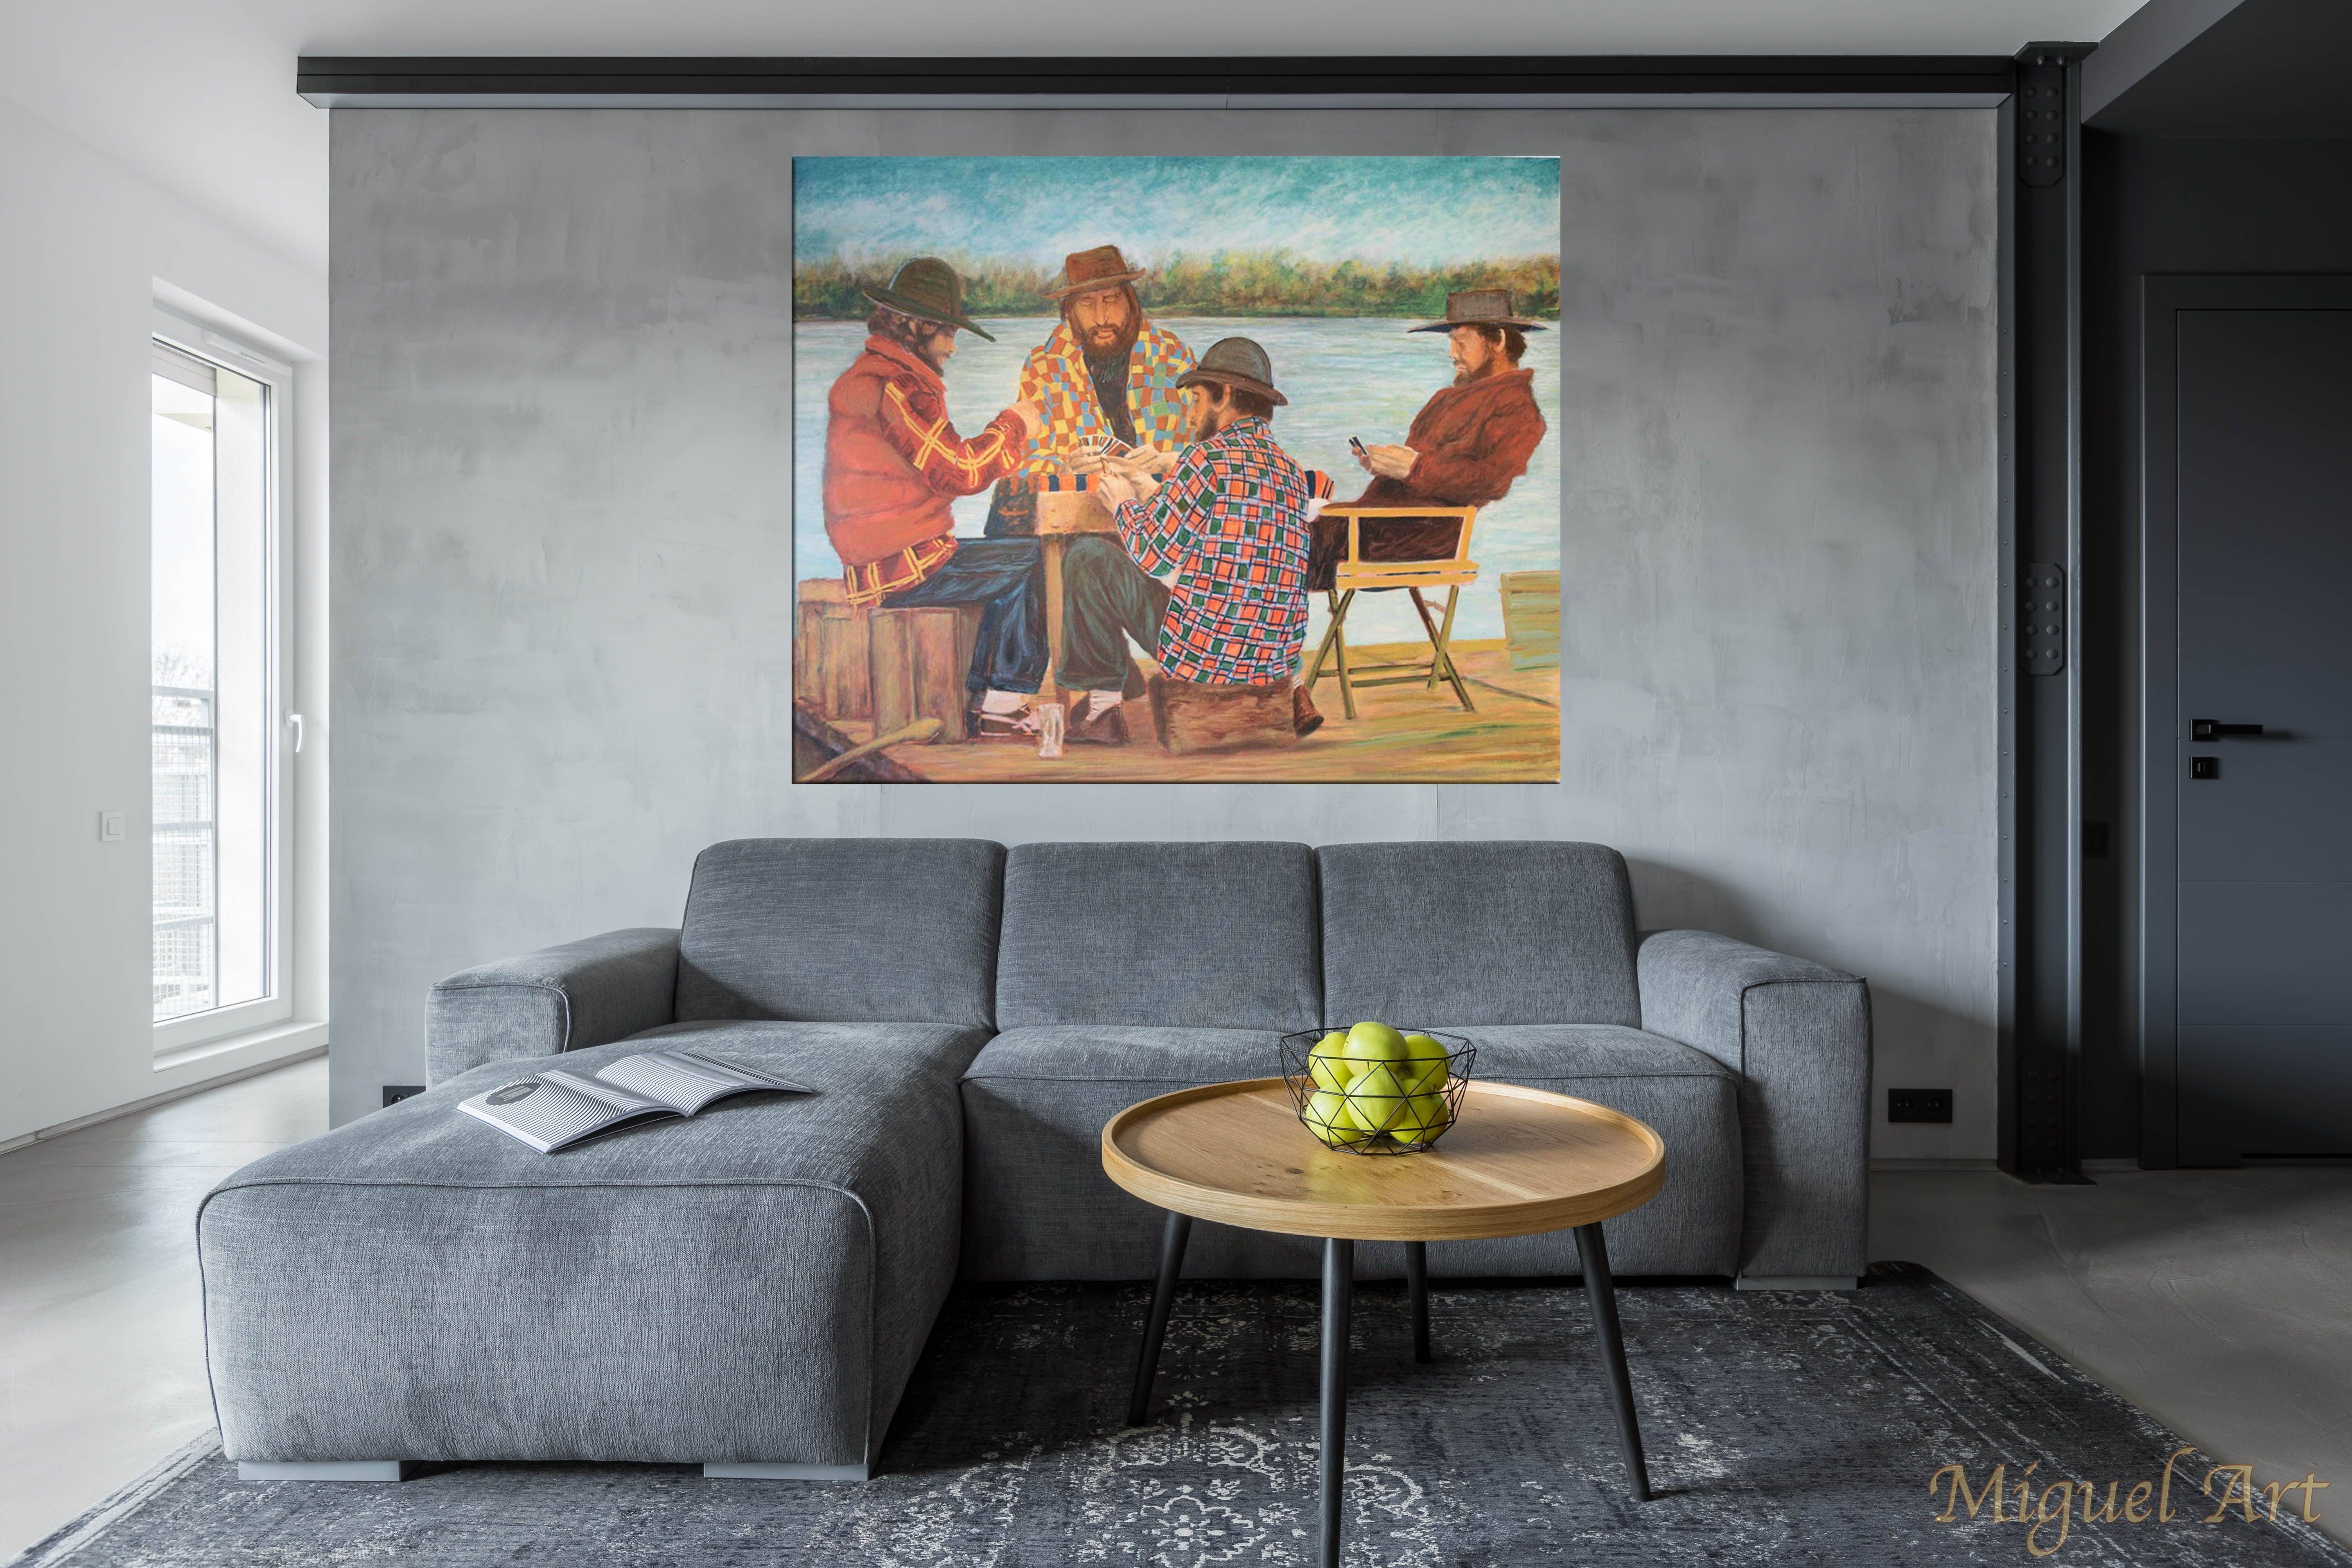 Painting of Jugadores de Cartas displayed on the wall above a grey couch